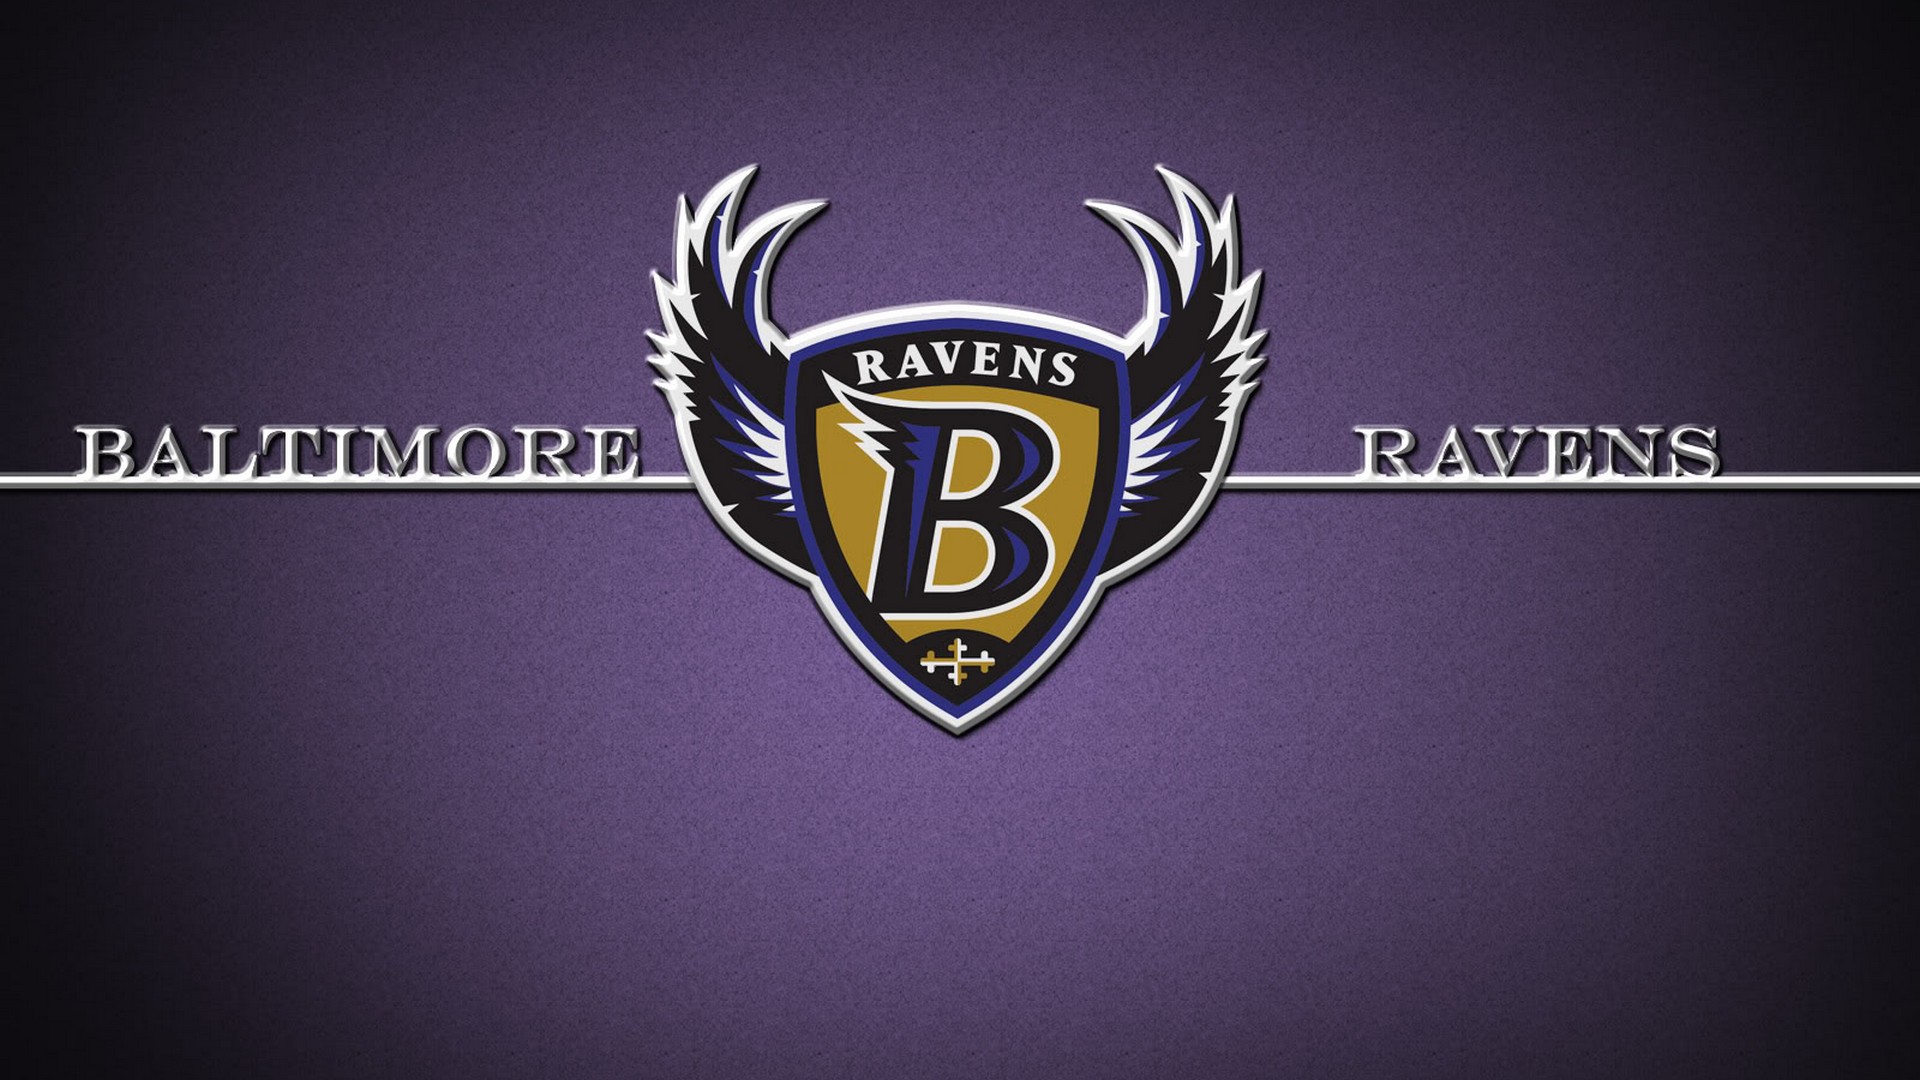 HD Ravens Wallpapers With high-resolution 1920X1080 pixel. You can use this wallpaper for your Mac or Windows Desktop Background, iPhone, Android or Tablet and another Smartphone device